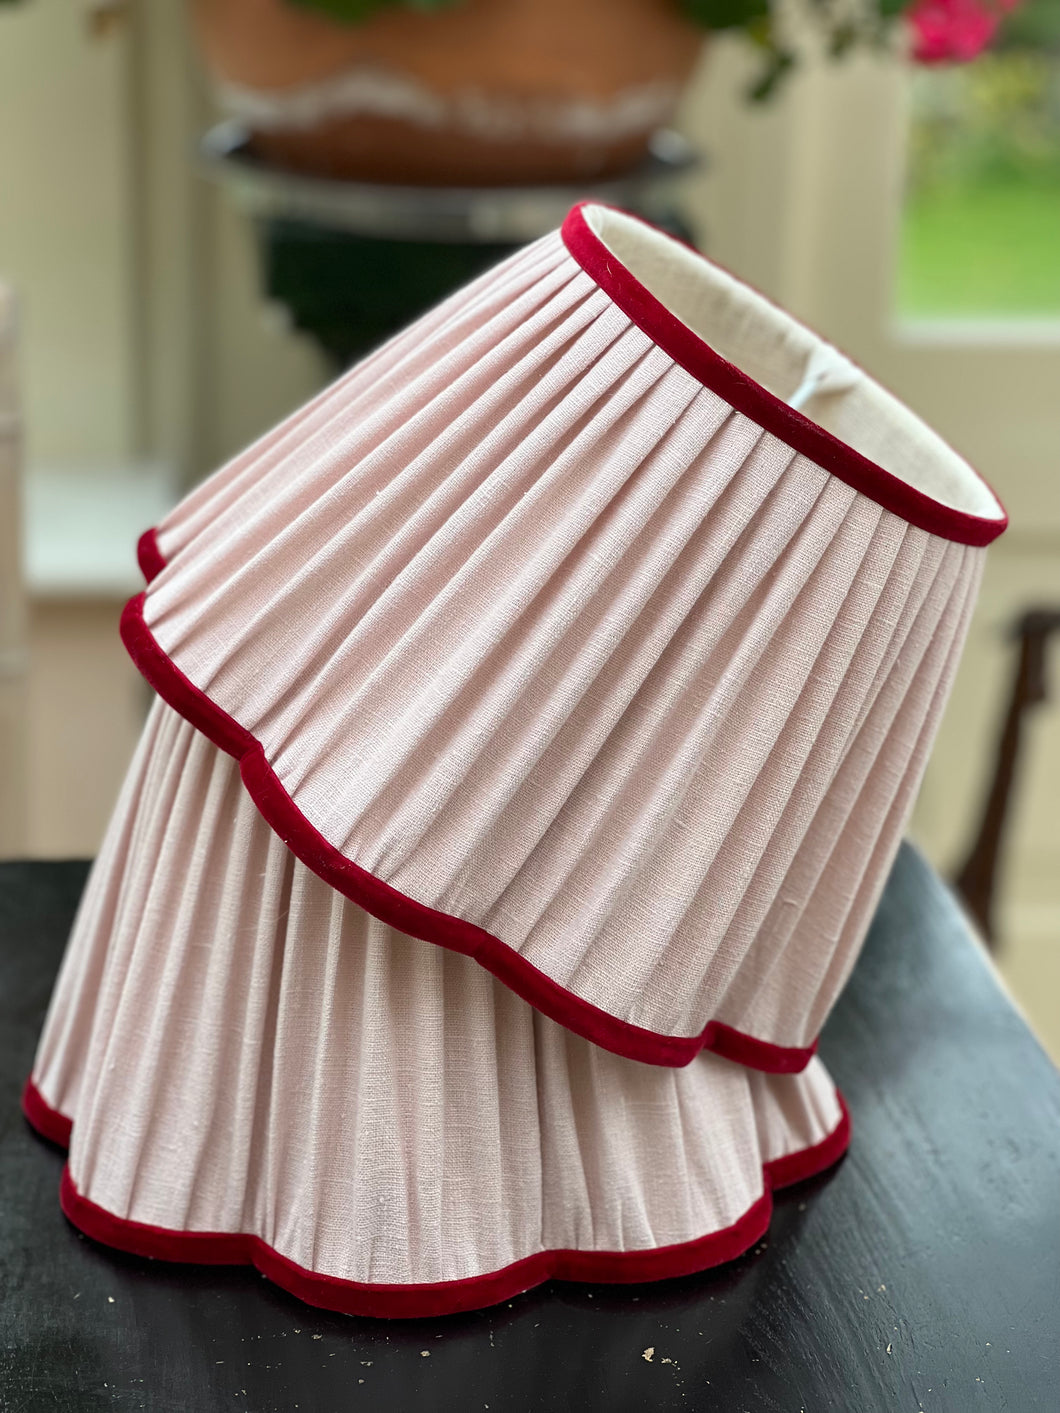 Softest pink linen daisy shade with red velvet trim 10”- a Fenella signature design